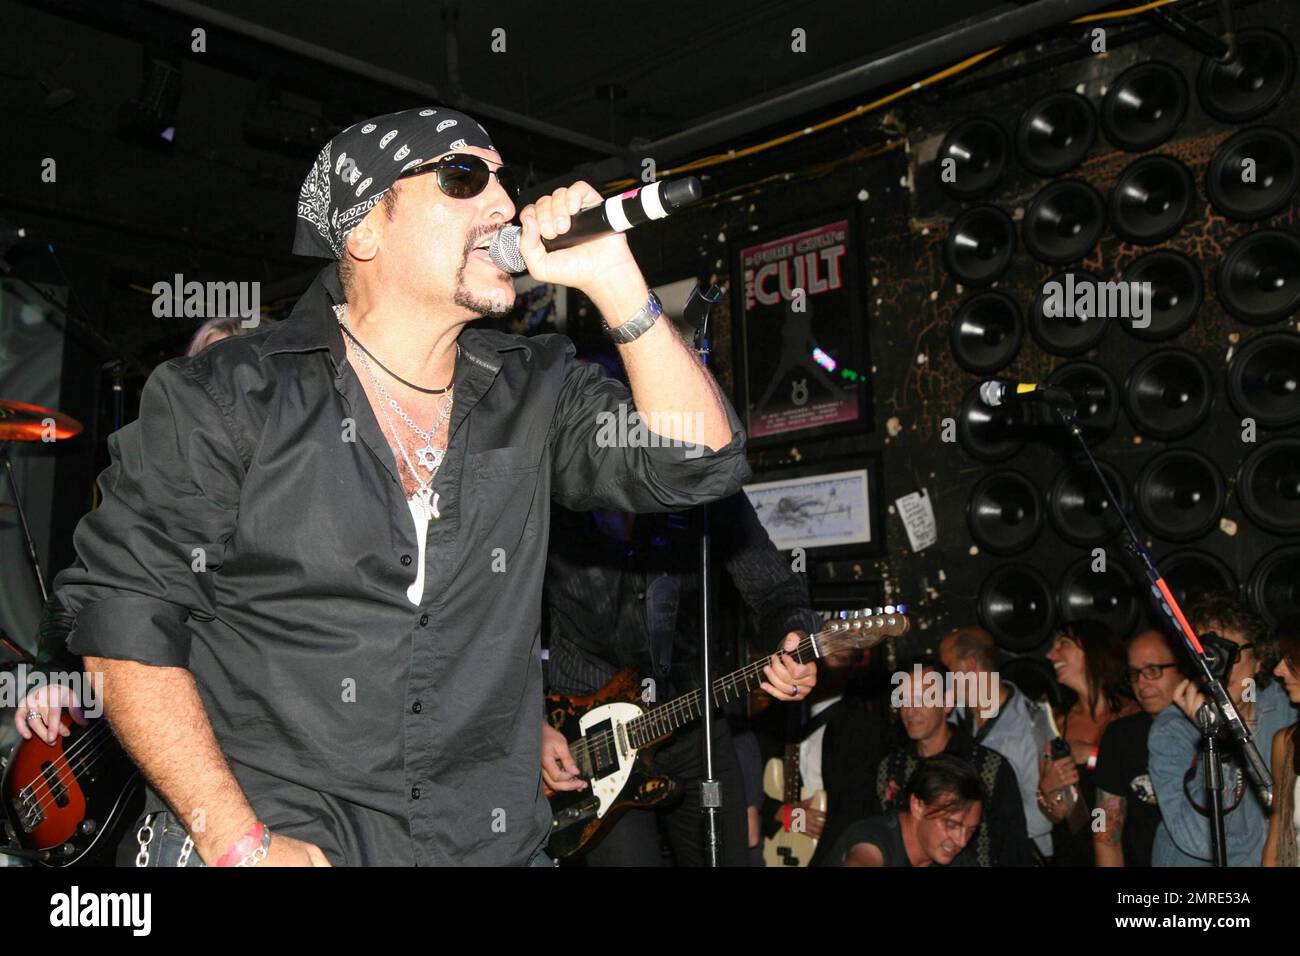 Carmine Appice performs at the John Varvatos 10th Anniversary Party held at at John Varvatos 315 Bowery Boutique, once the iconic rock club CBGB. New York, NY. 09/11/10. Stock Photo